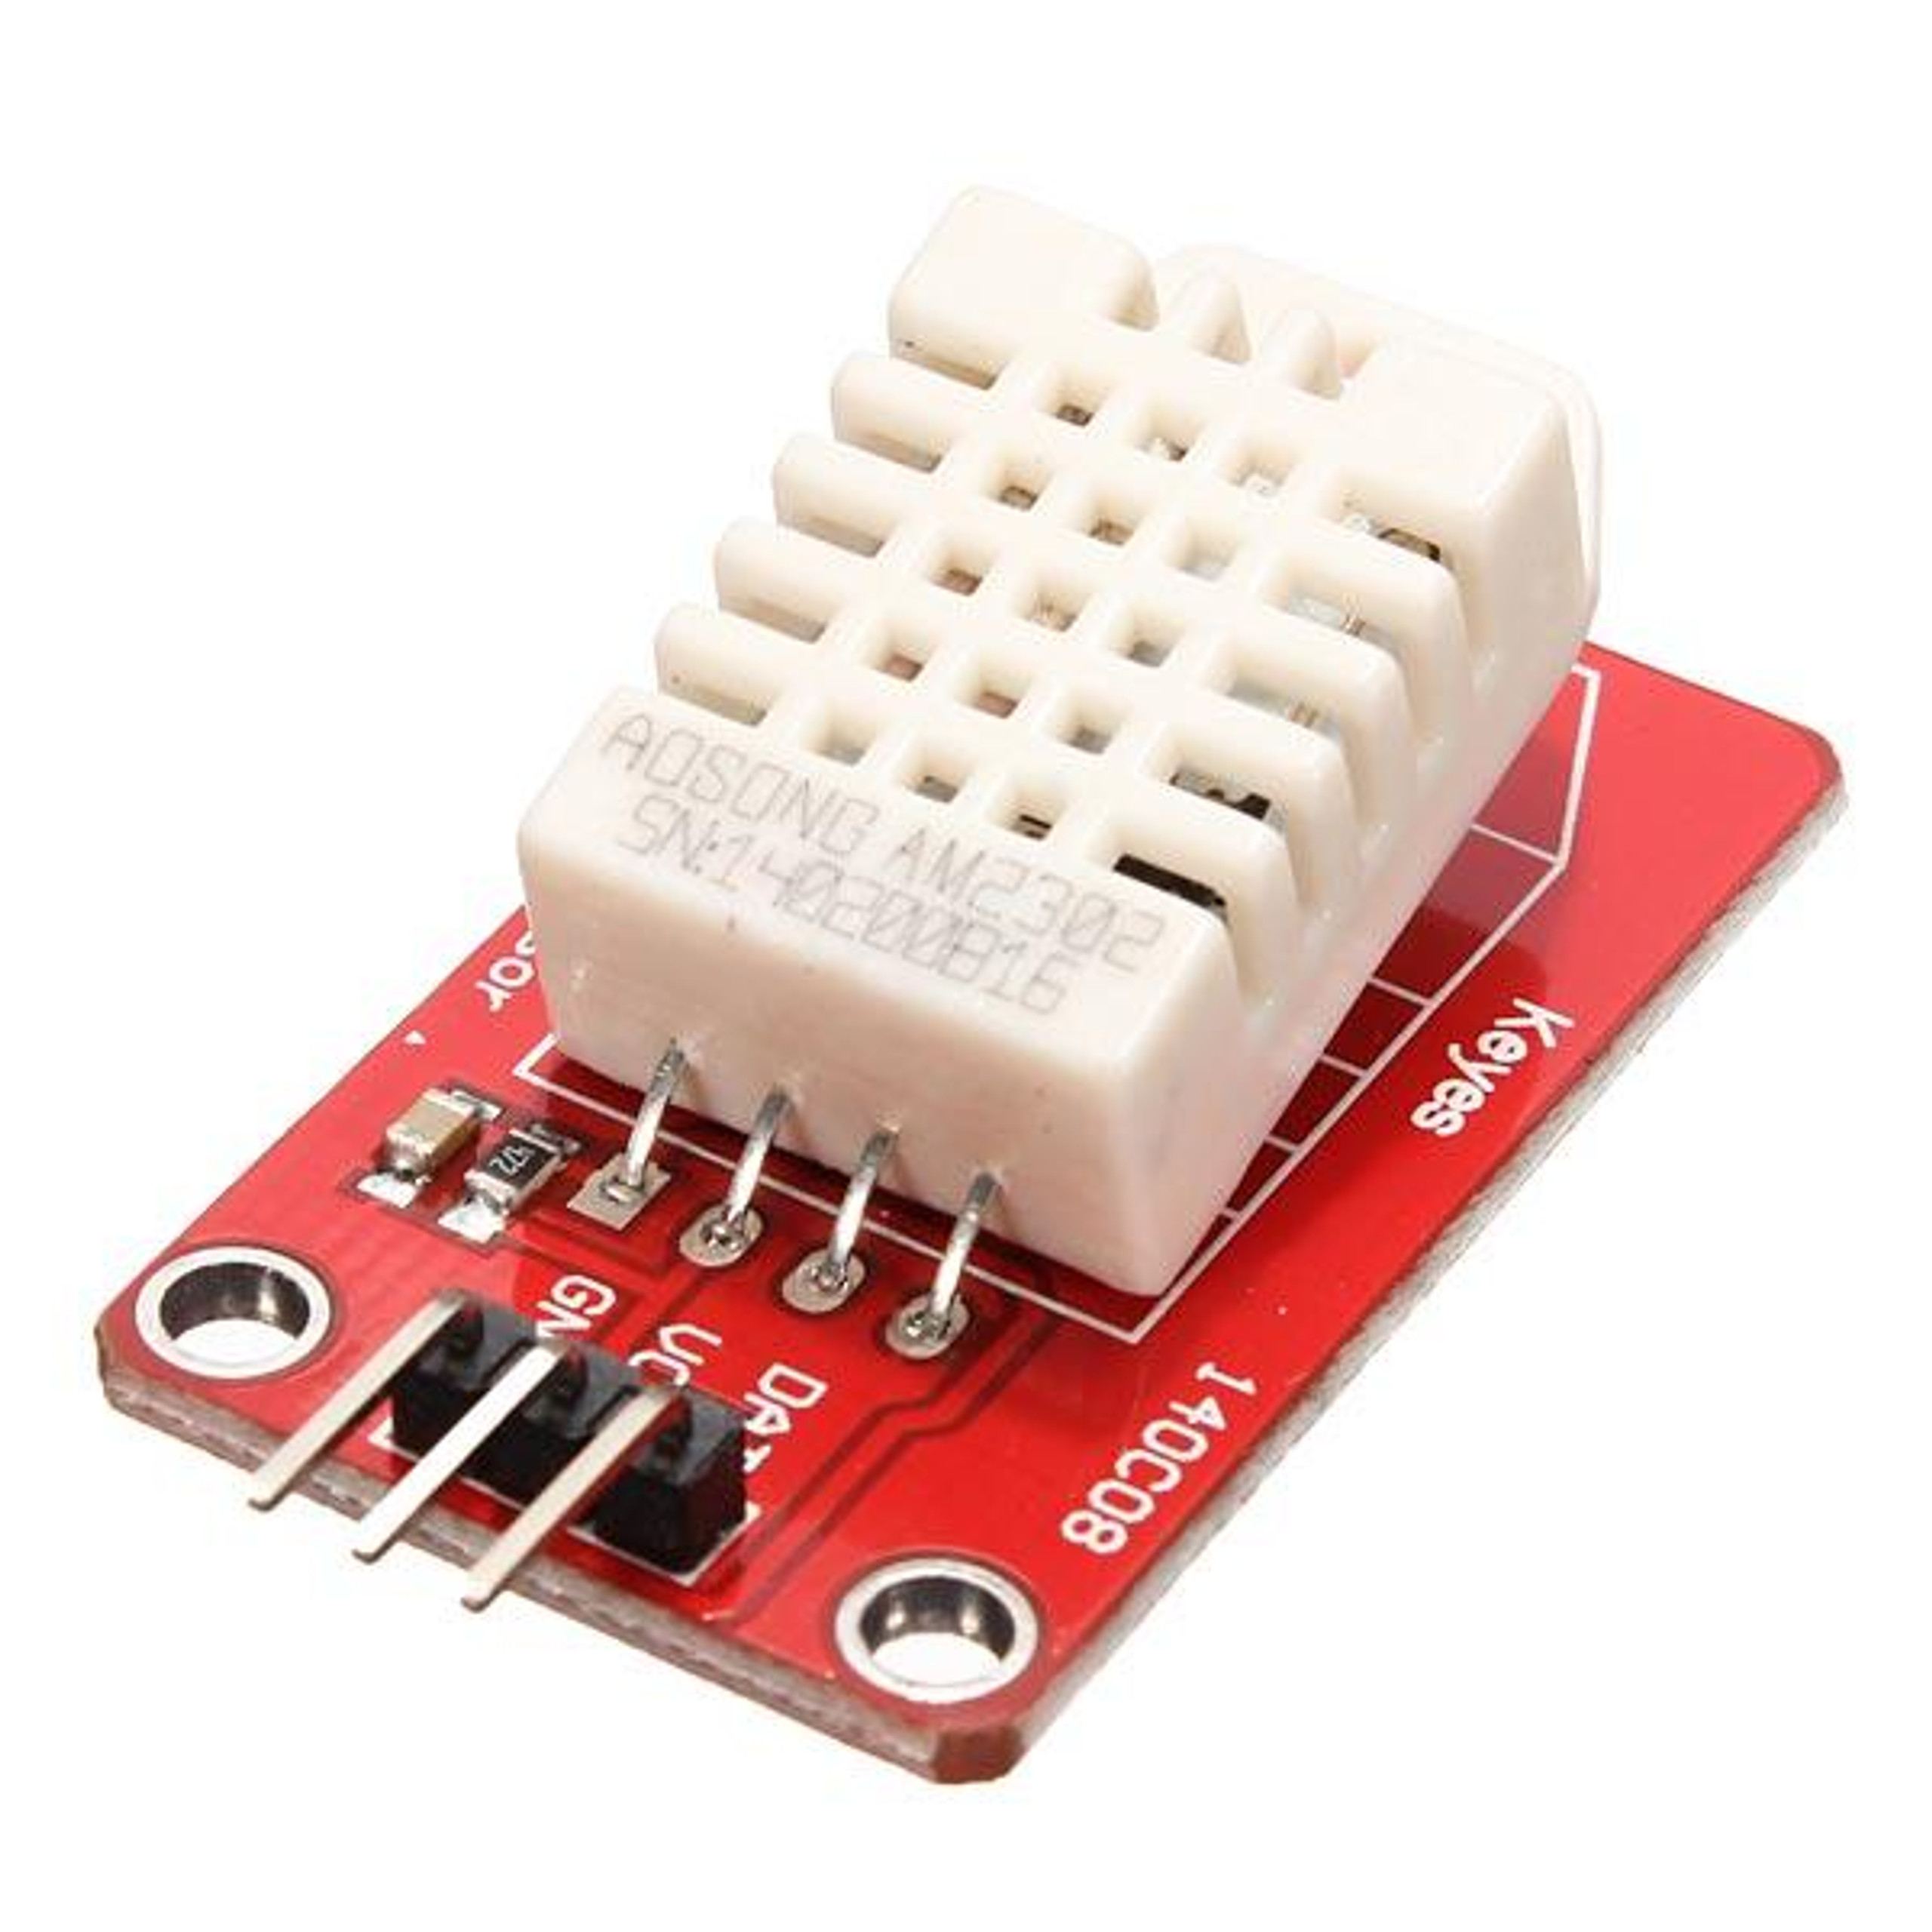 Am2302 Dht22 Temp And Humidity Sensor Accurate